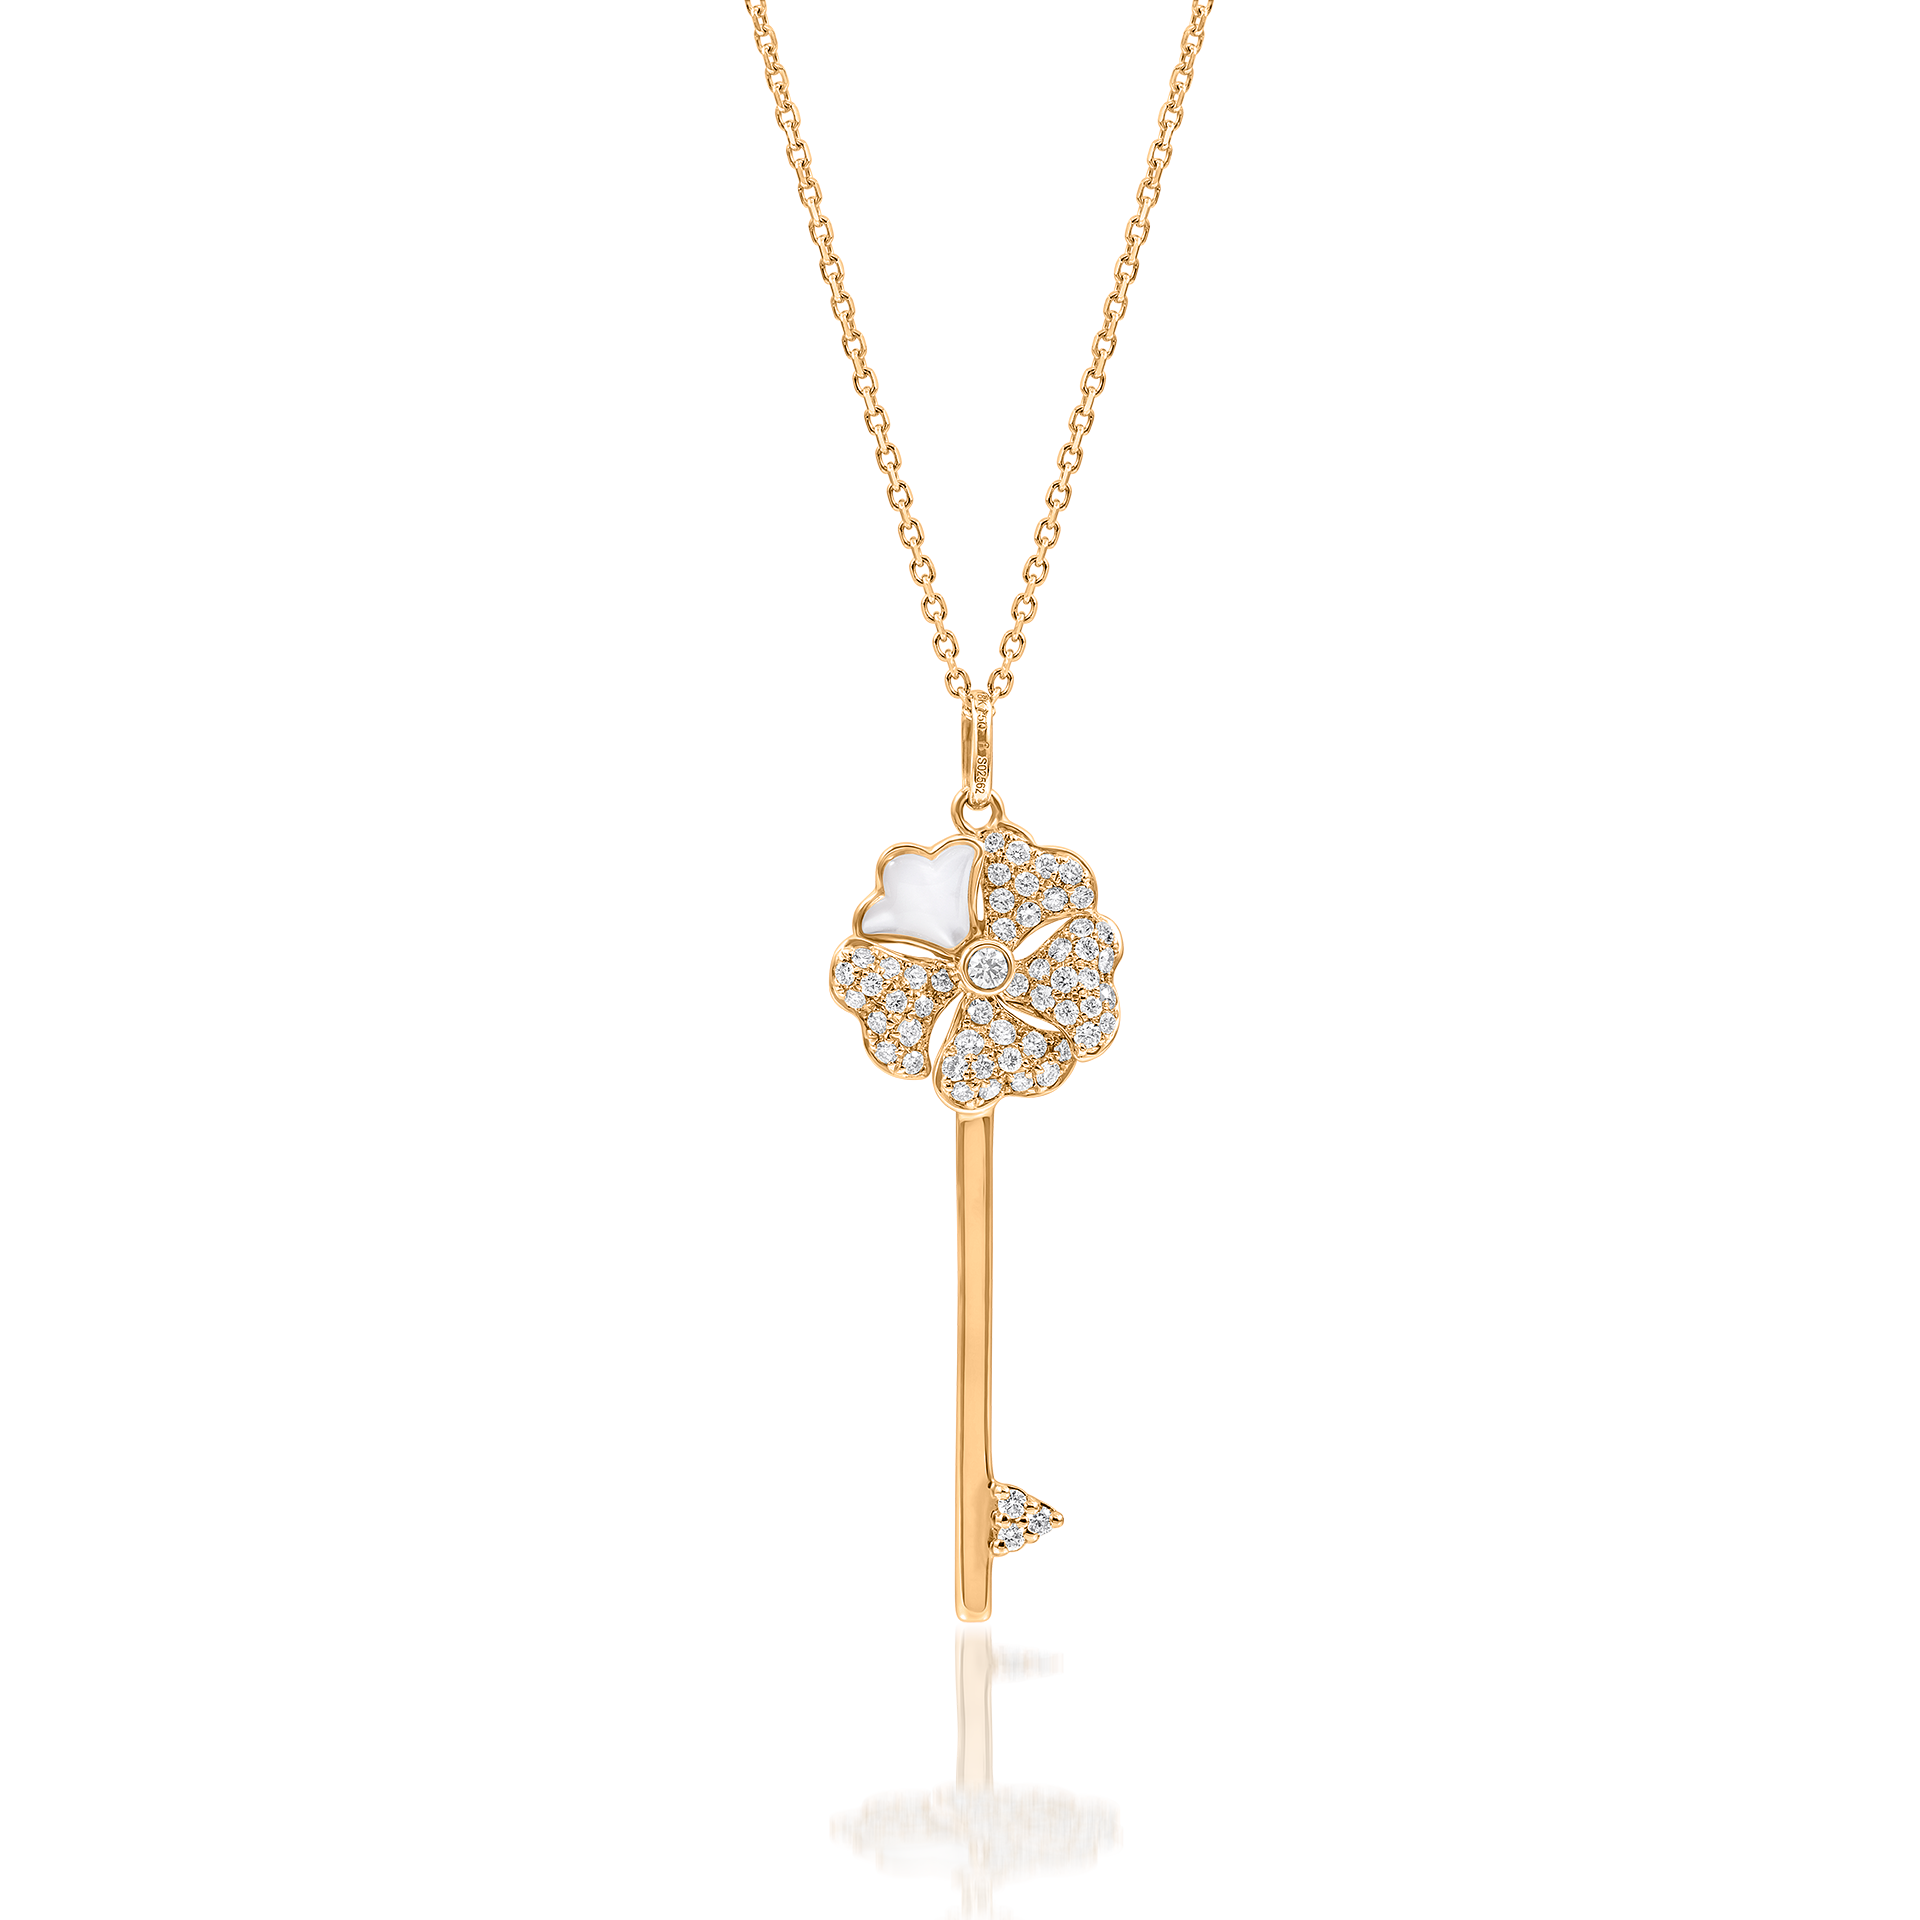 Bloom Diamond Key Necklace with Mother-of-Pearl In 18K Yellow Gold